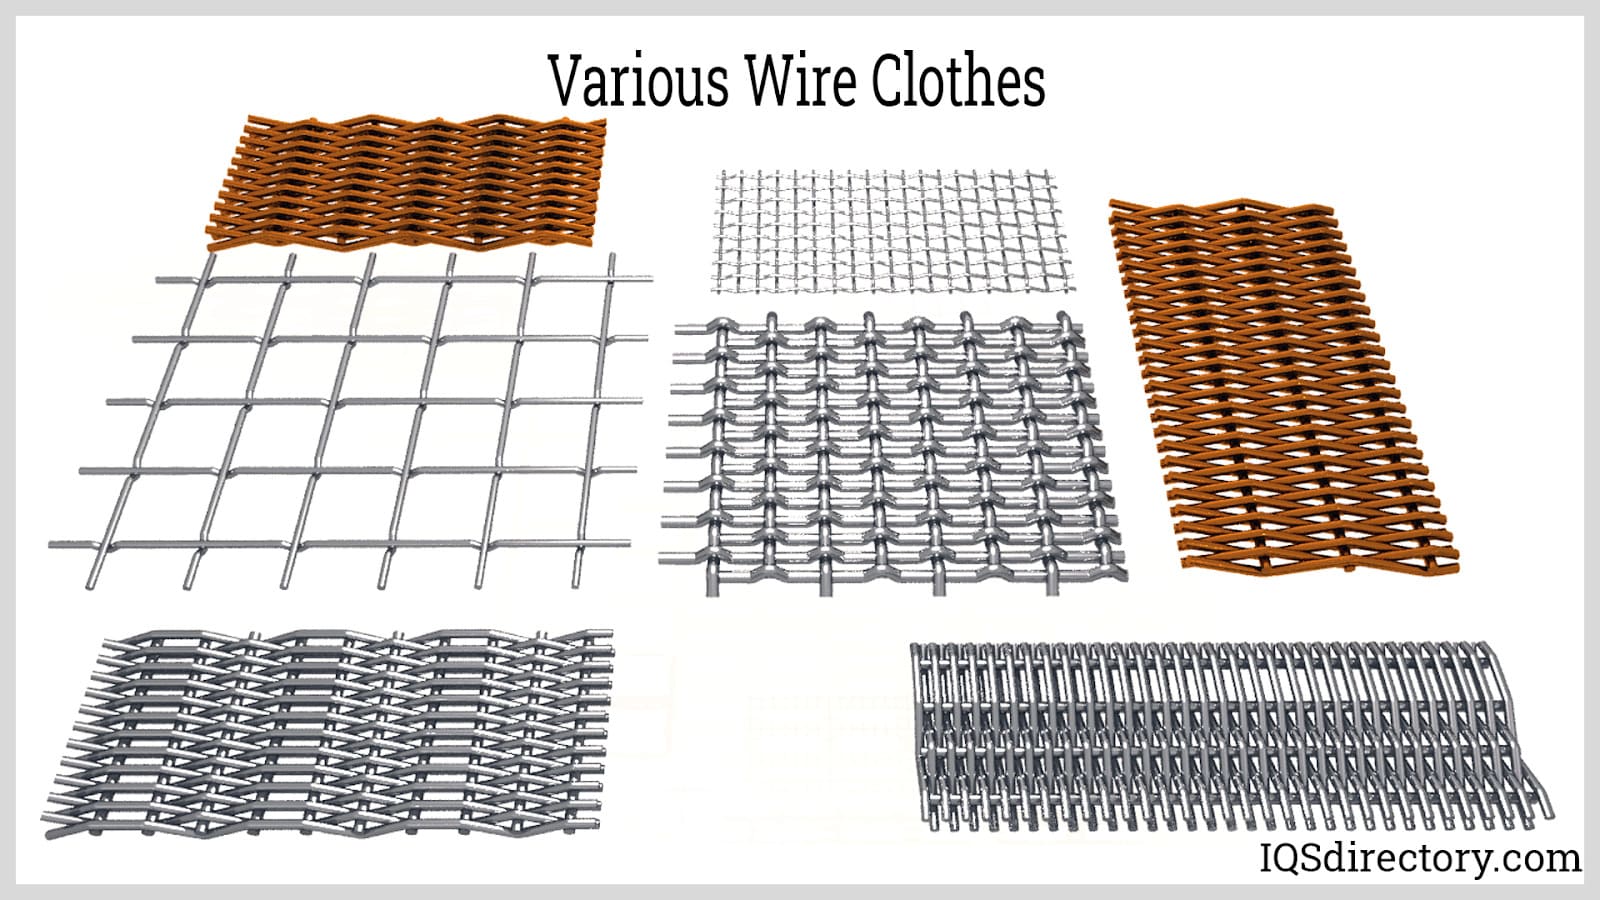 https://www.iqsdirectory.com/articles/wire-mesh/wire-cloth/various-wire-clothes.jpg